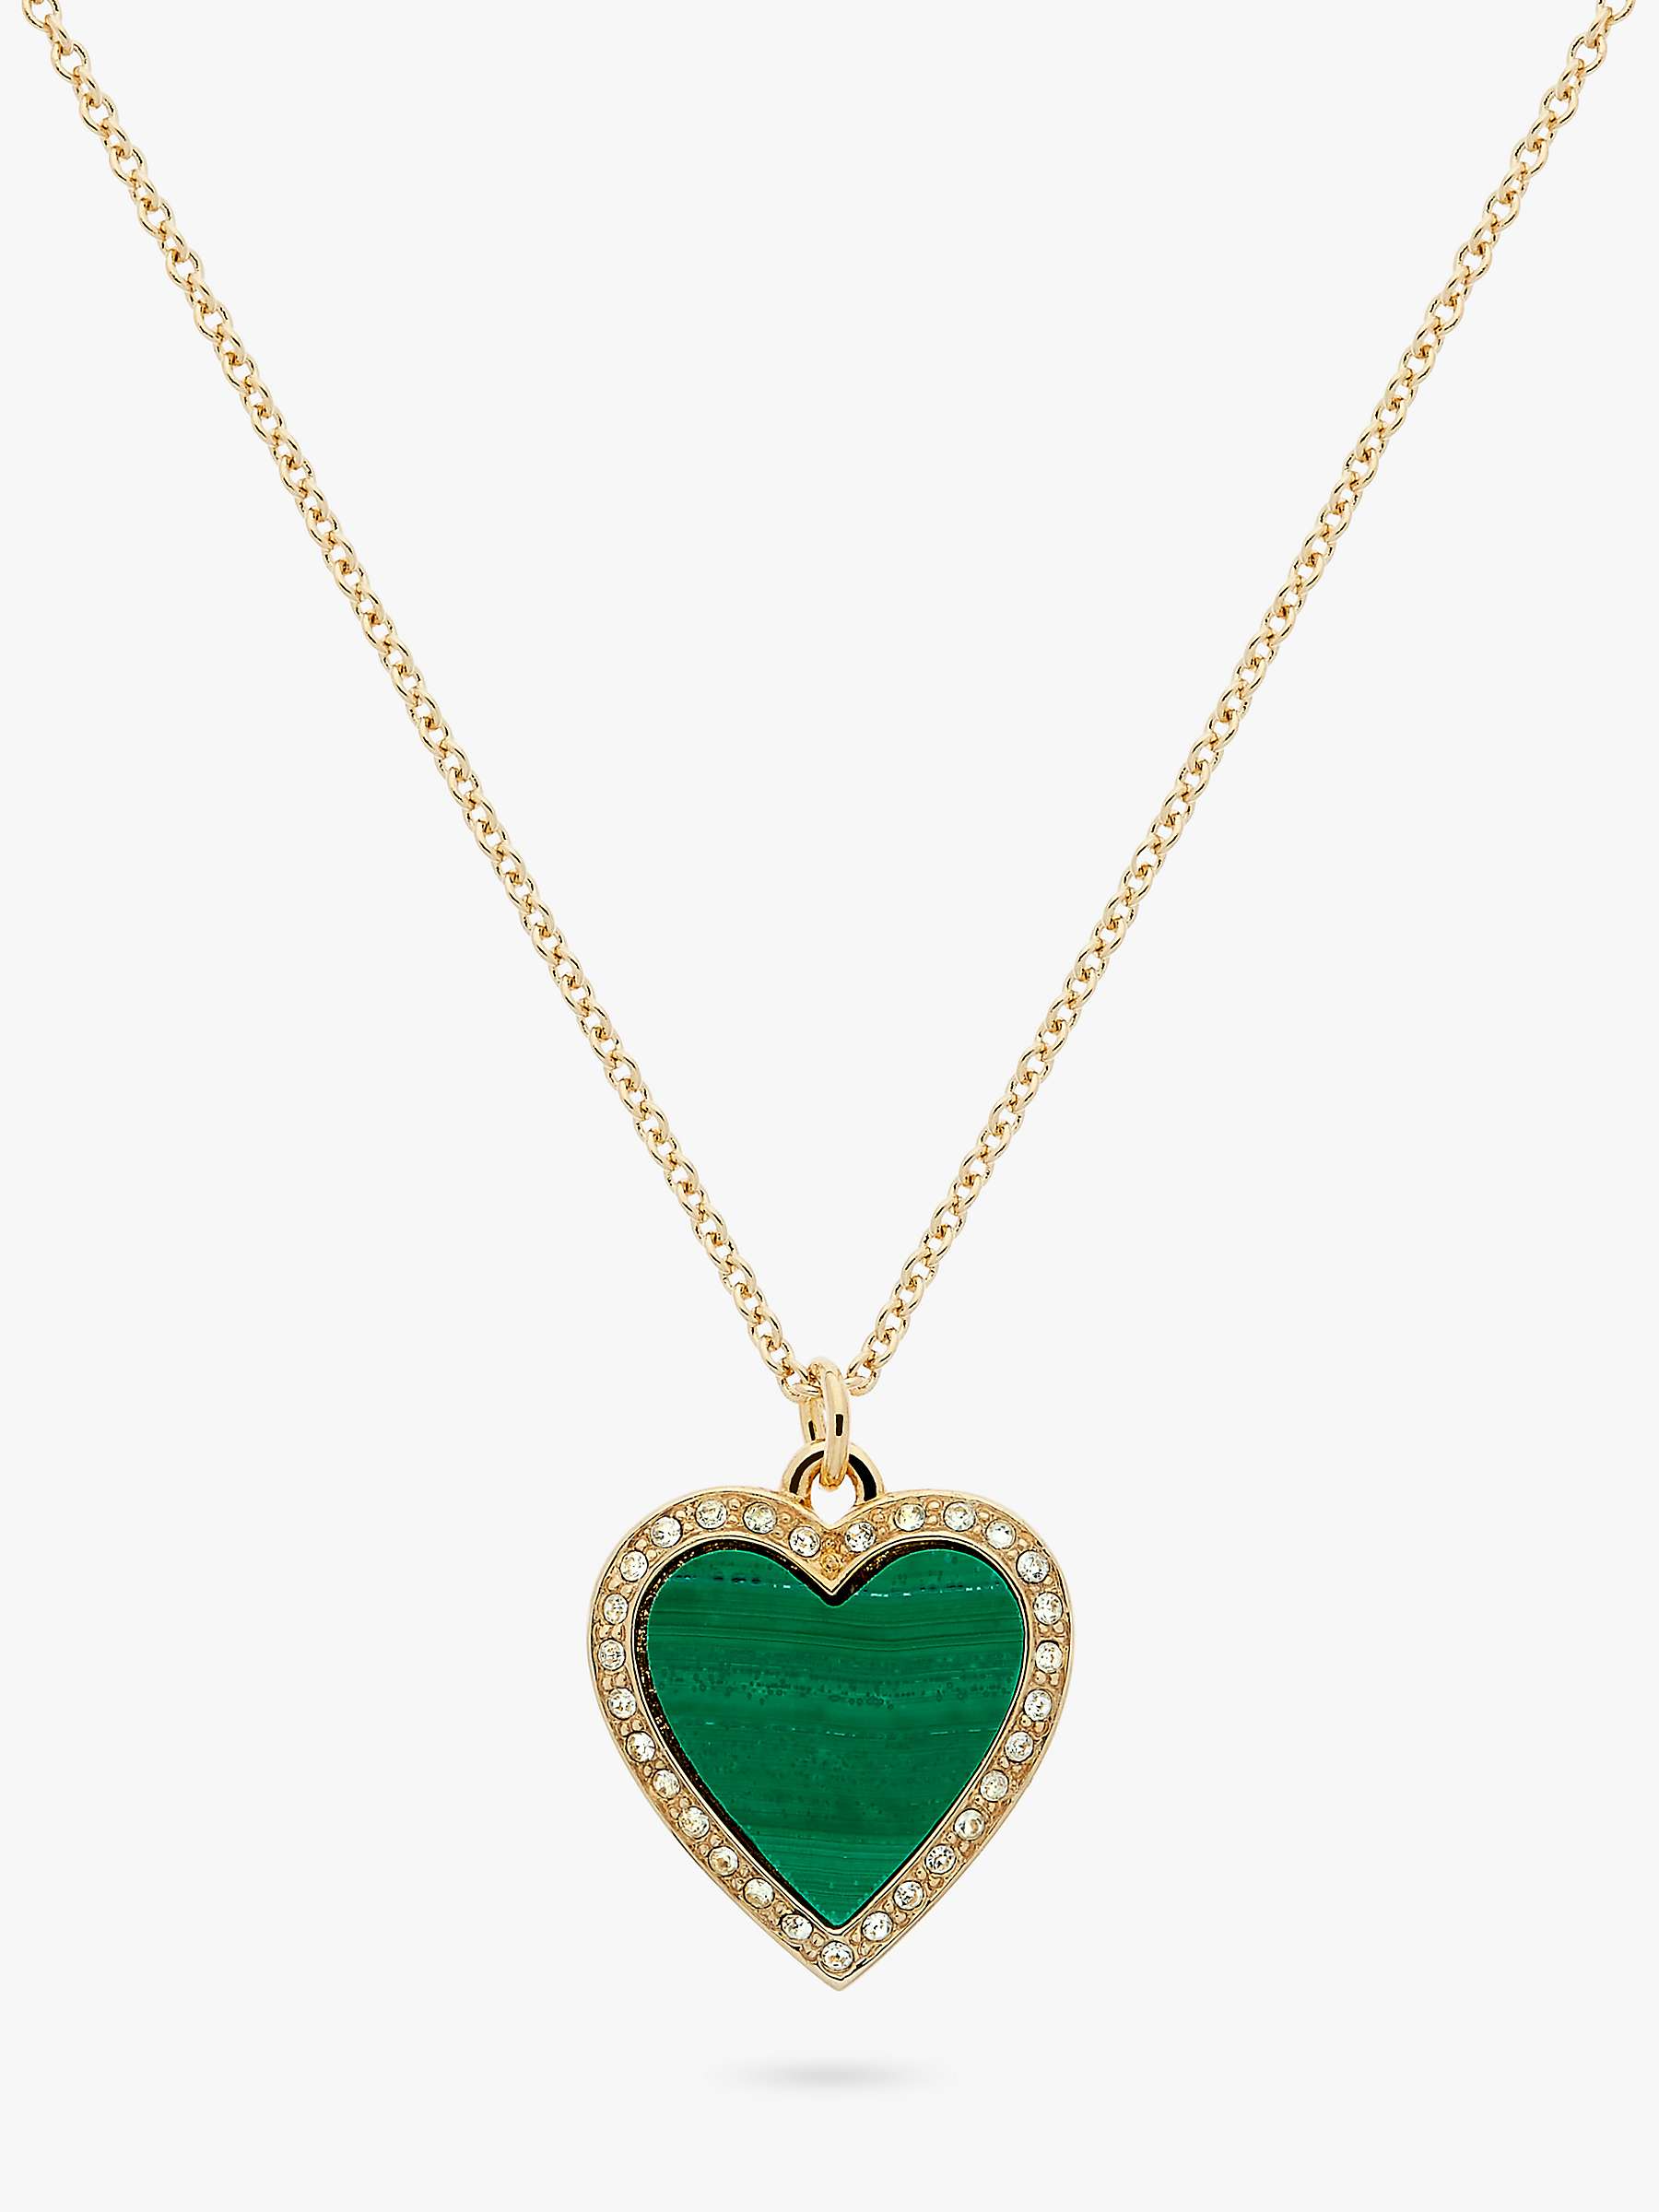 Buy Melissa Odabash Malachite and Crystal Heart Pendant Necklace, Gold/Green Online at johnlewis.com